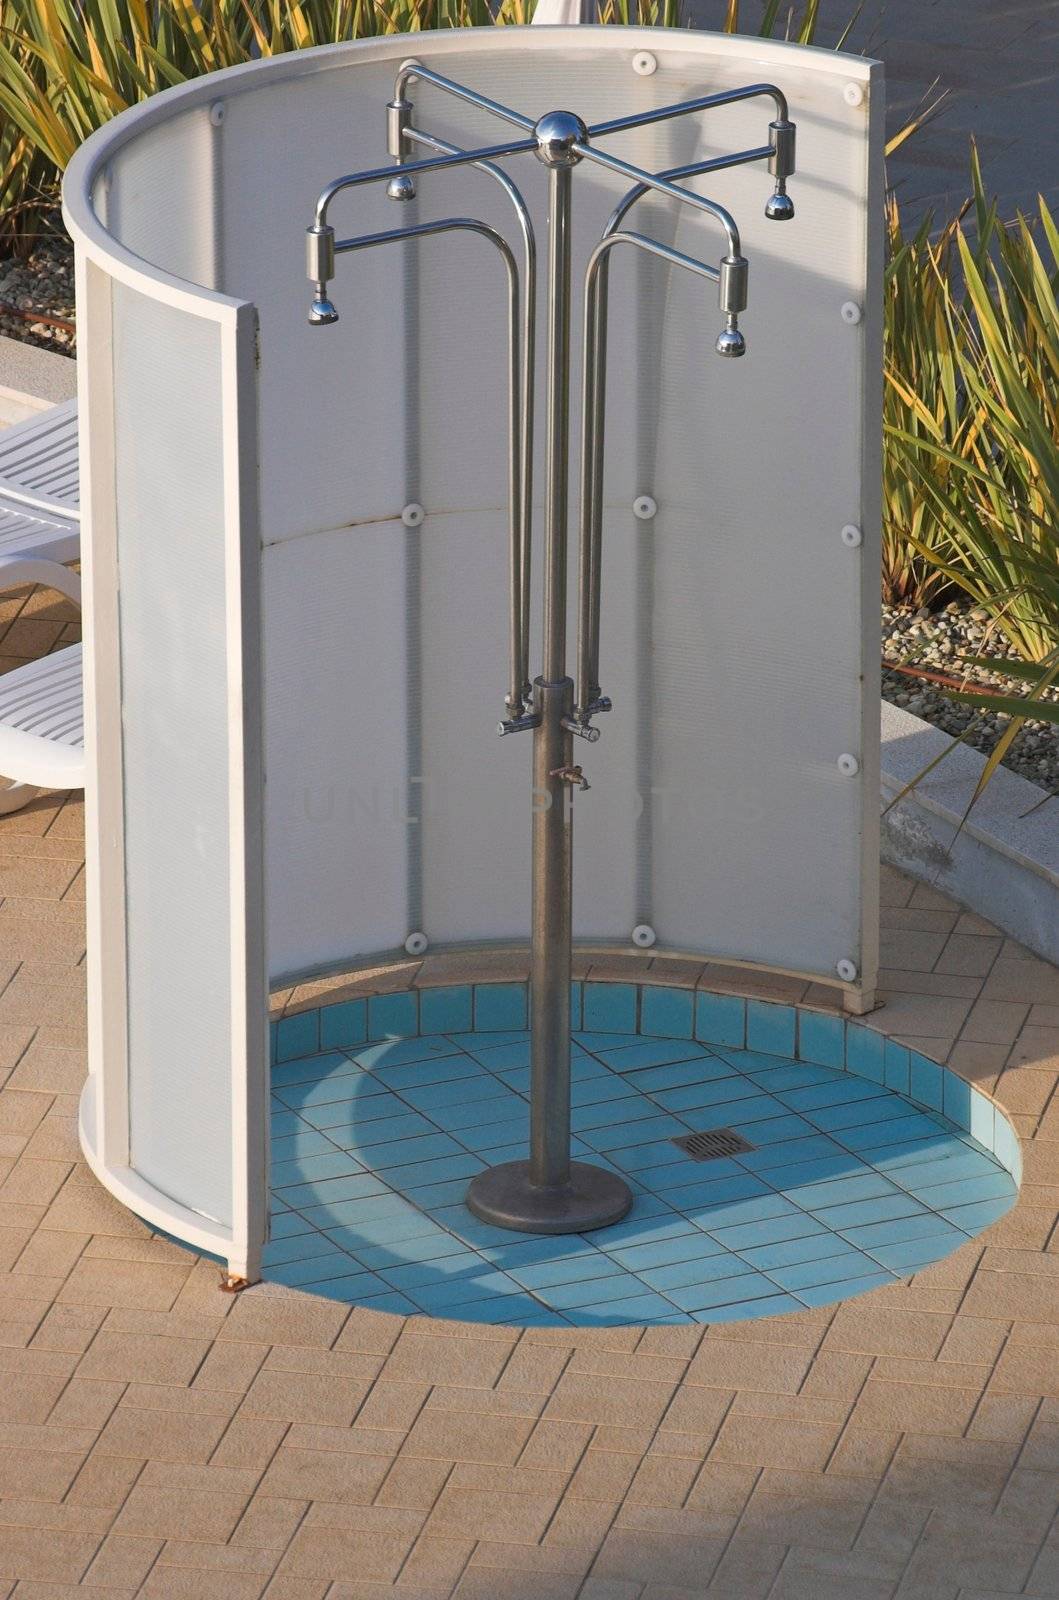 External shower appliance at a swimming pool